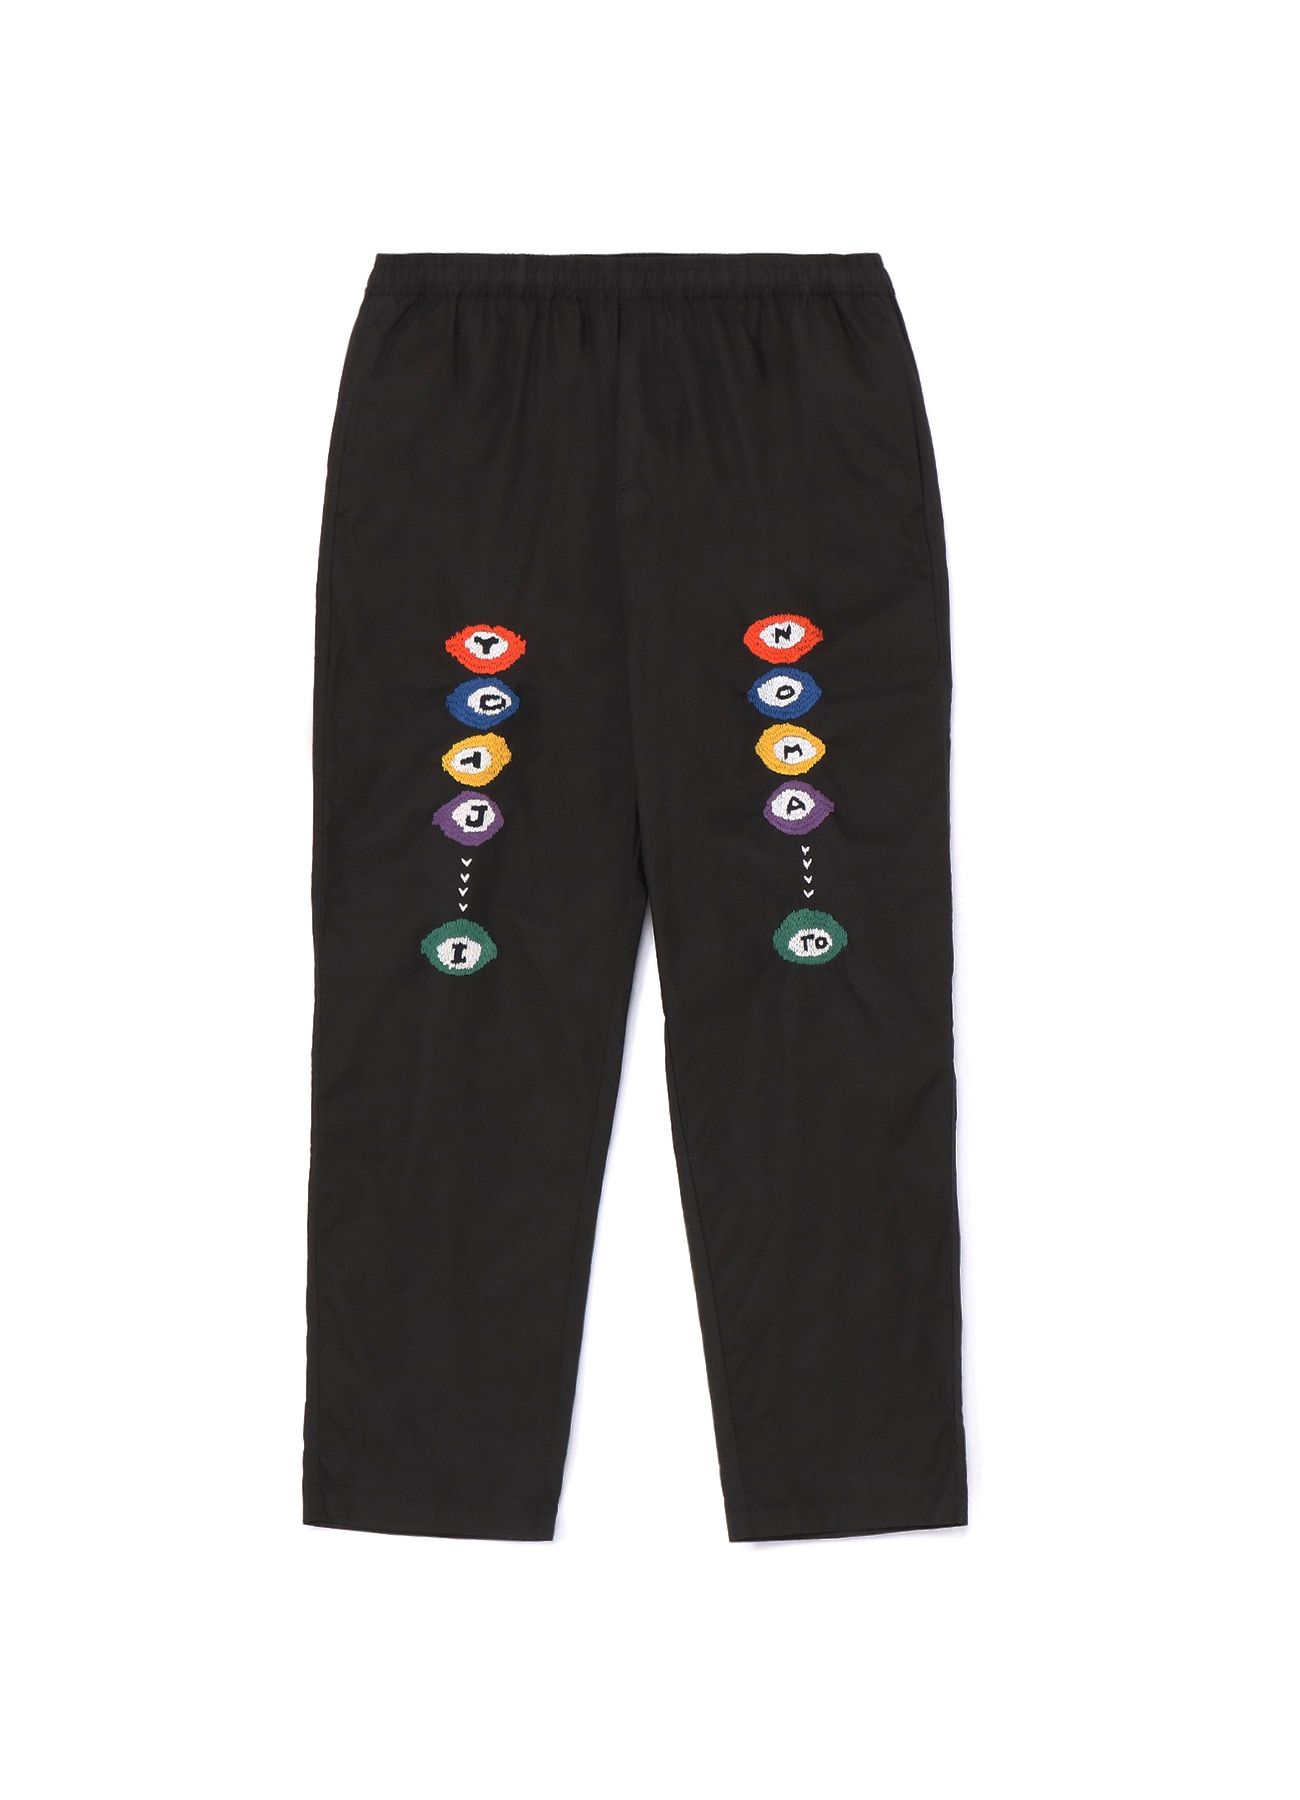 WILDSIDE × NOMA t.d. BILLIARDS HAND EMBROIDERY EASY PANTS